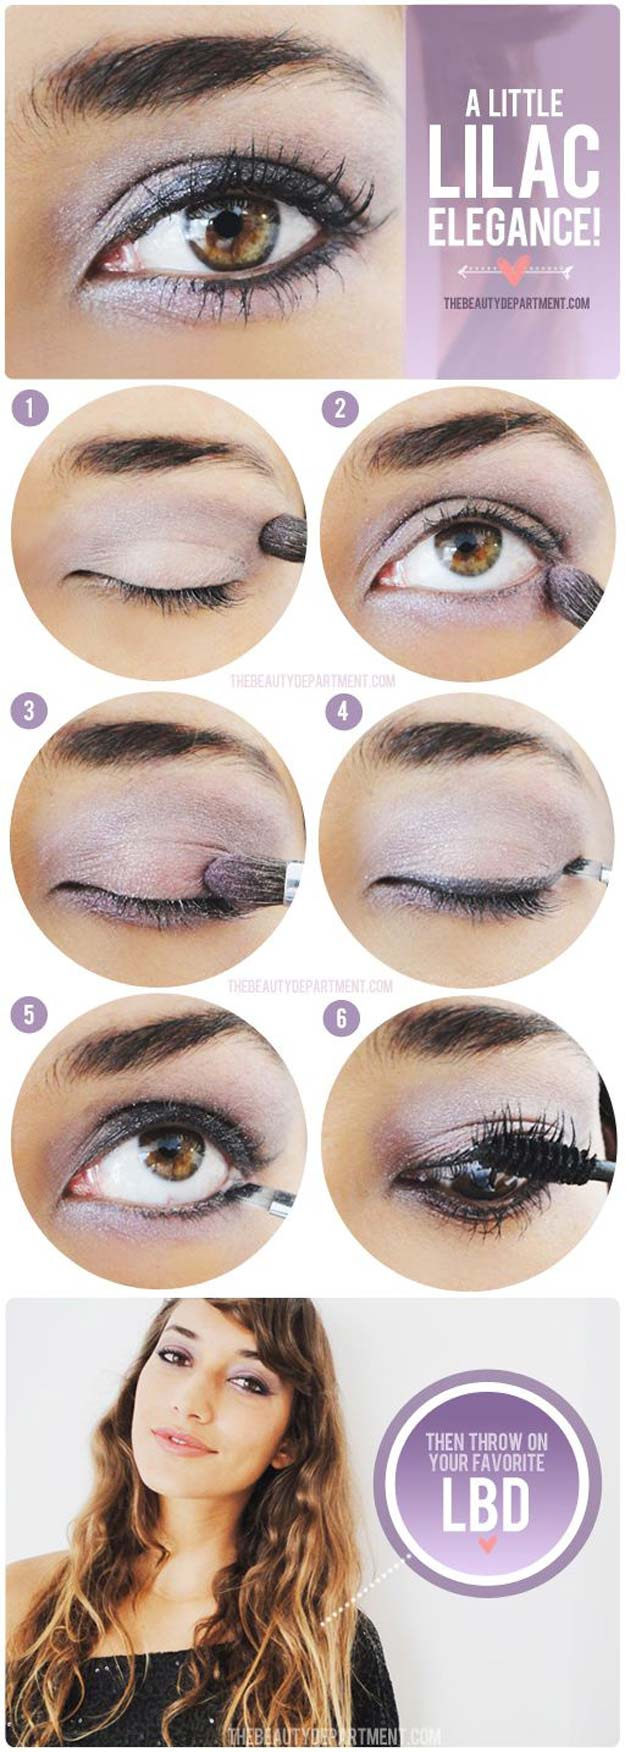 Prom Makeup Ideas For Brown Eyes 38 Makeup Ideas For Prom The Goddess